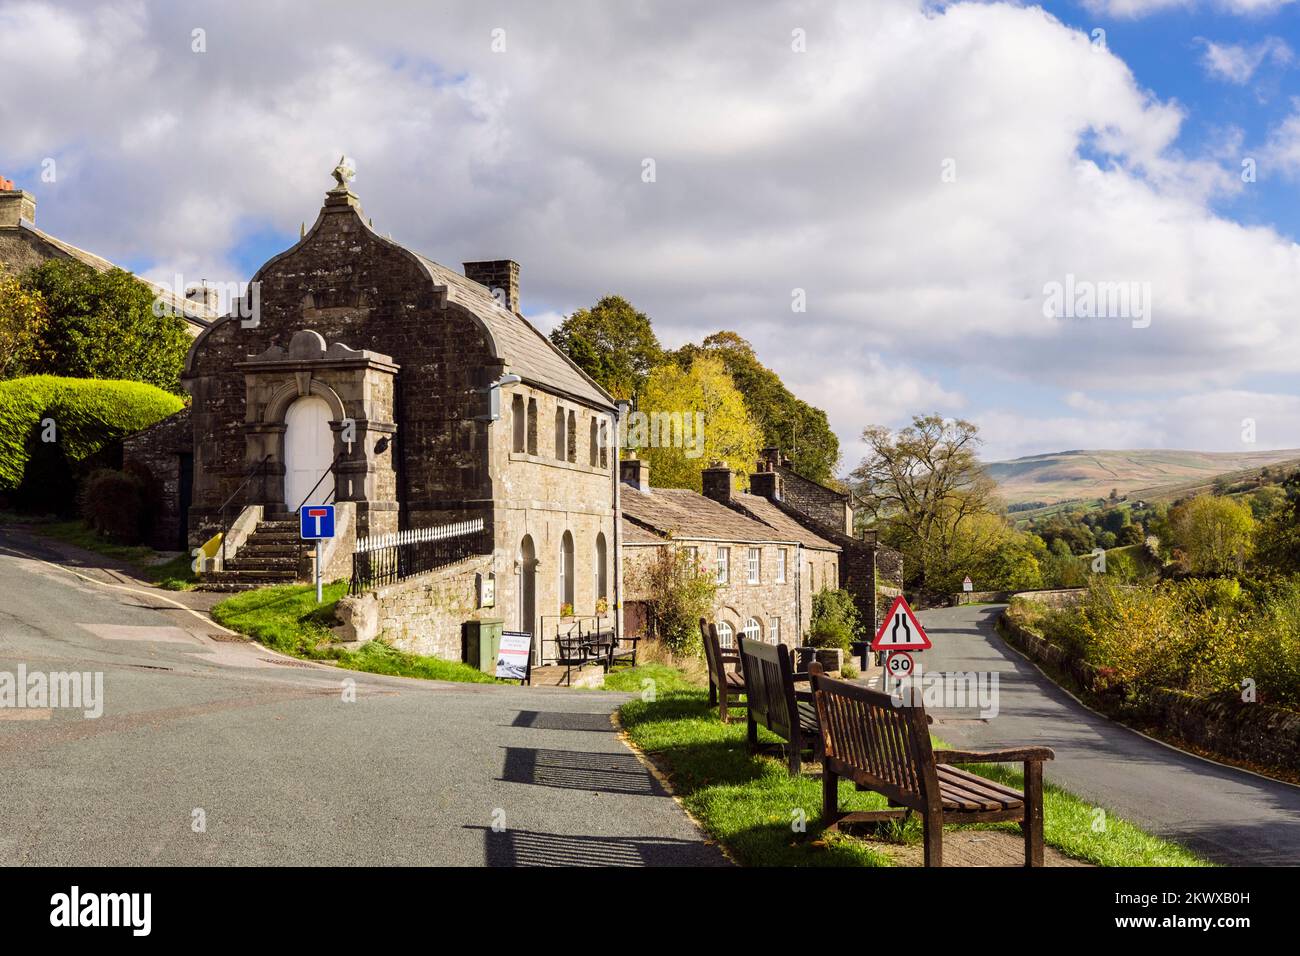 Benches by Muker Literary Institute and limestone cottages in village in Yorkshire Dales National Park. Muker, Swaledale, North Yorkshire, England, UK Stock Photo